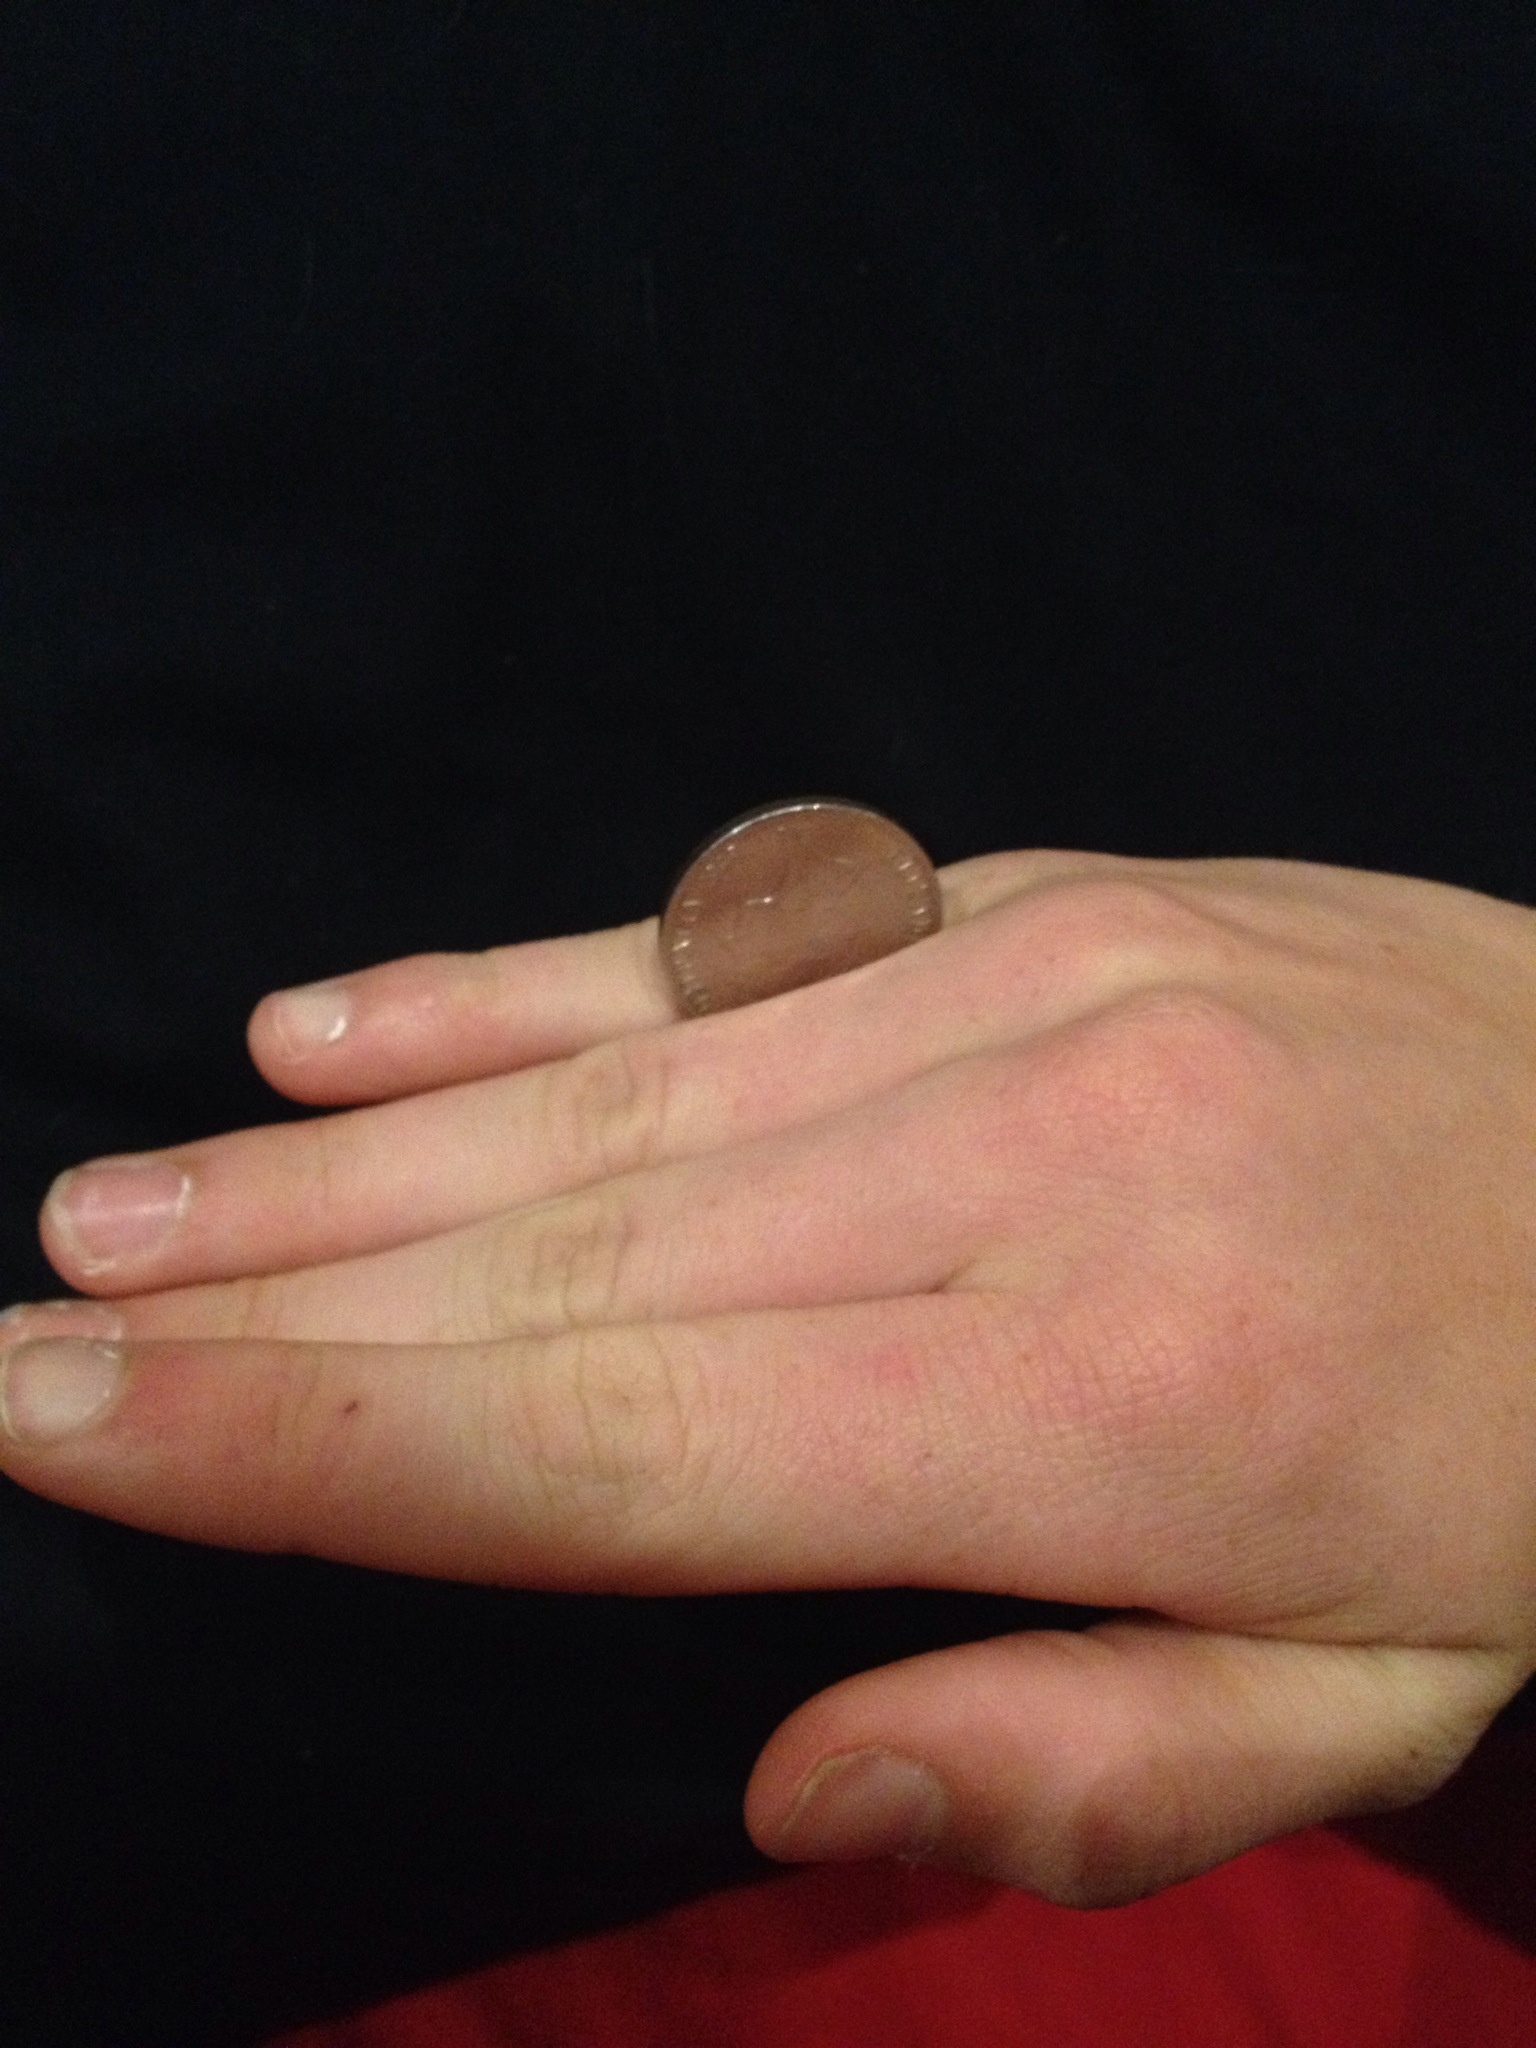 coin over knuckles trick